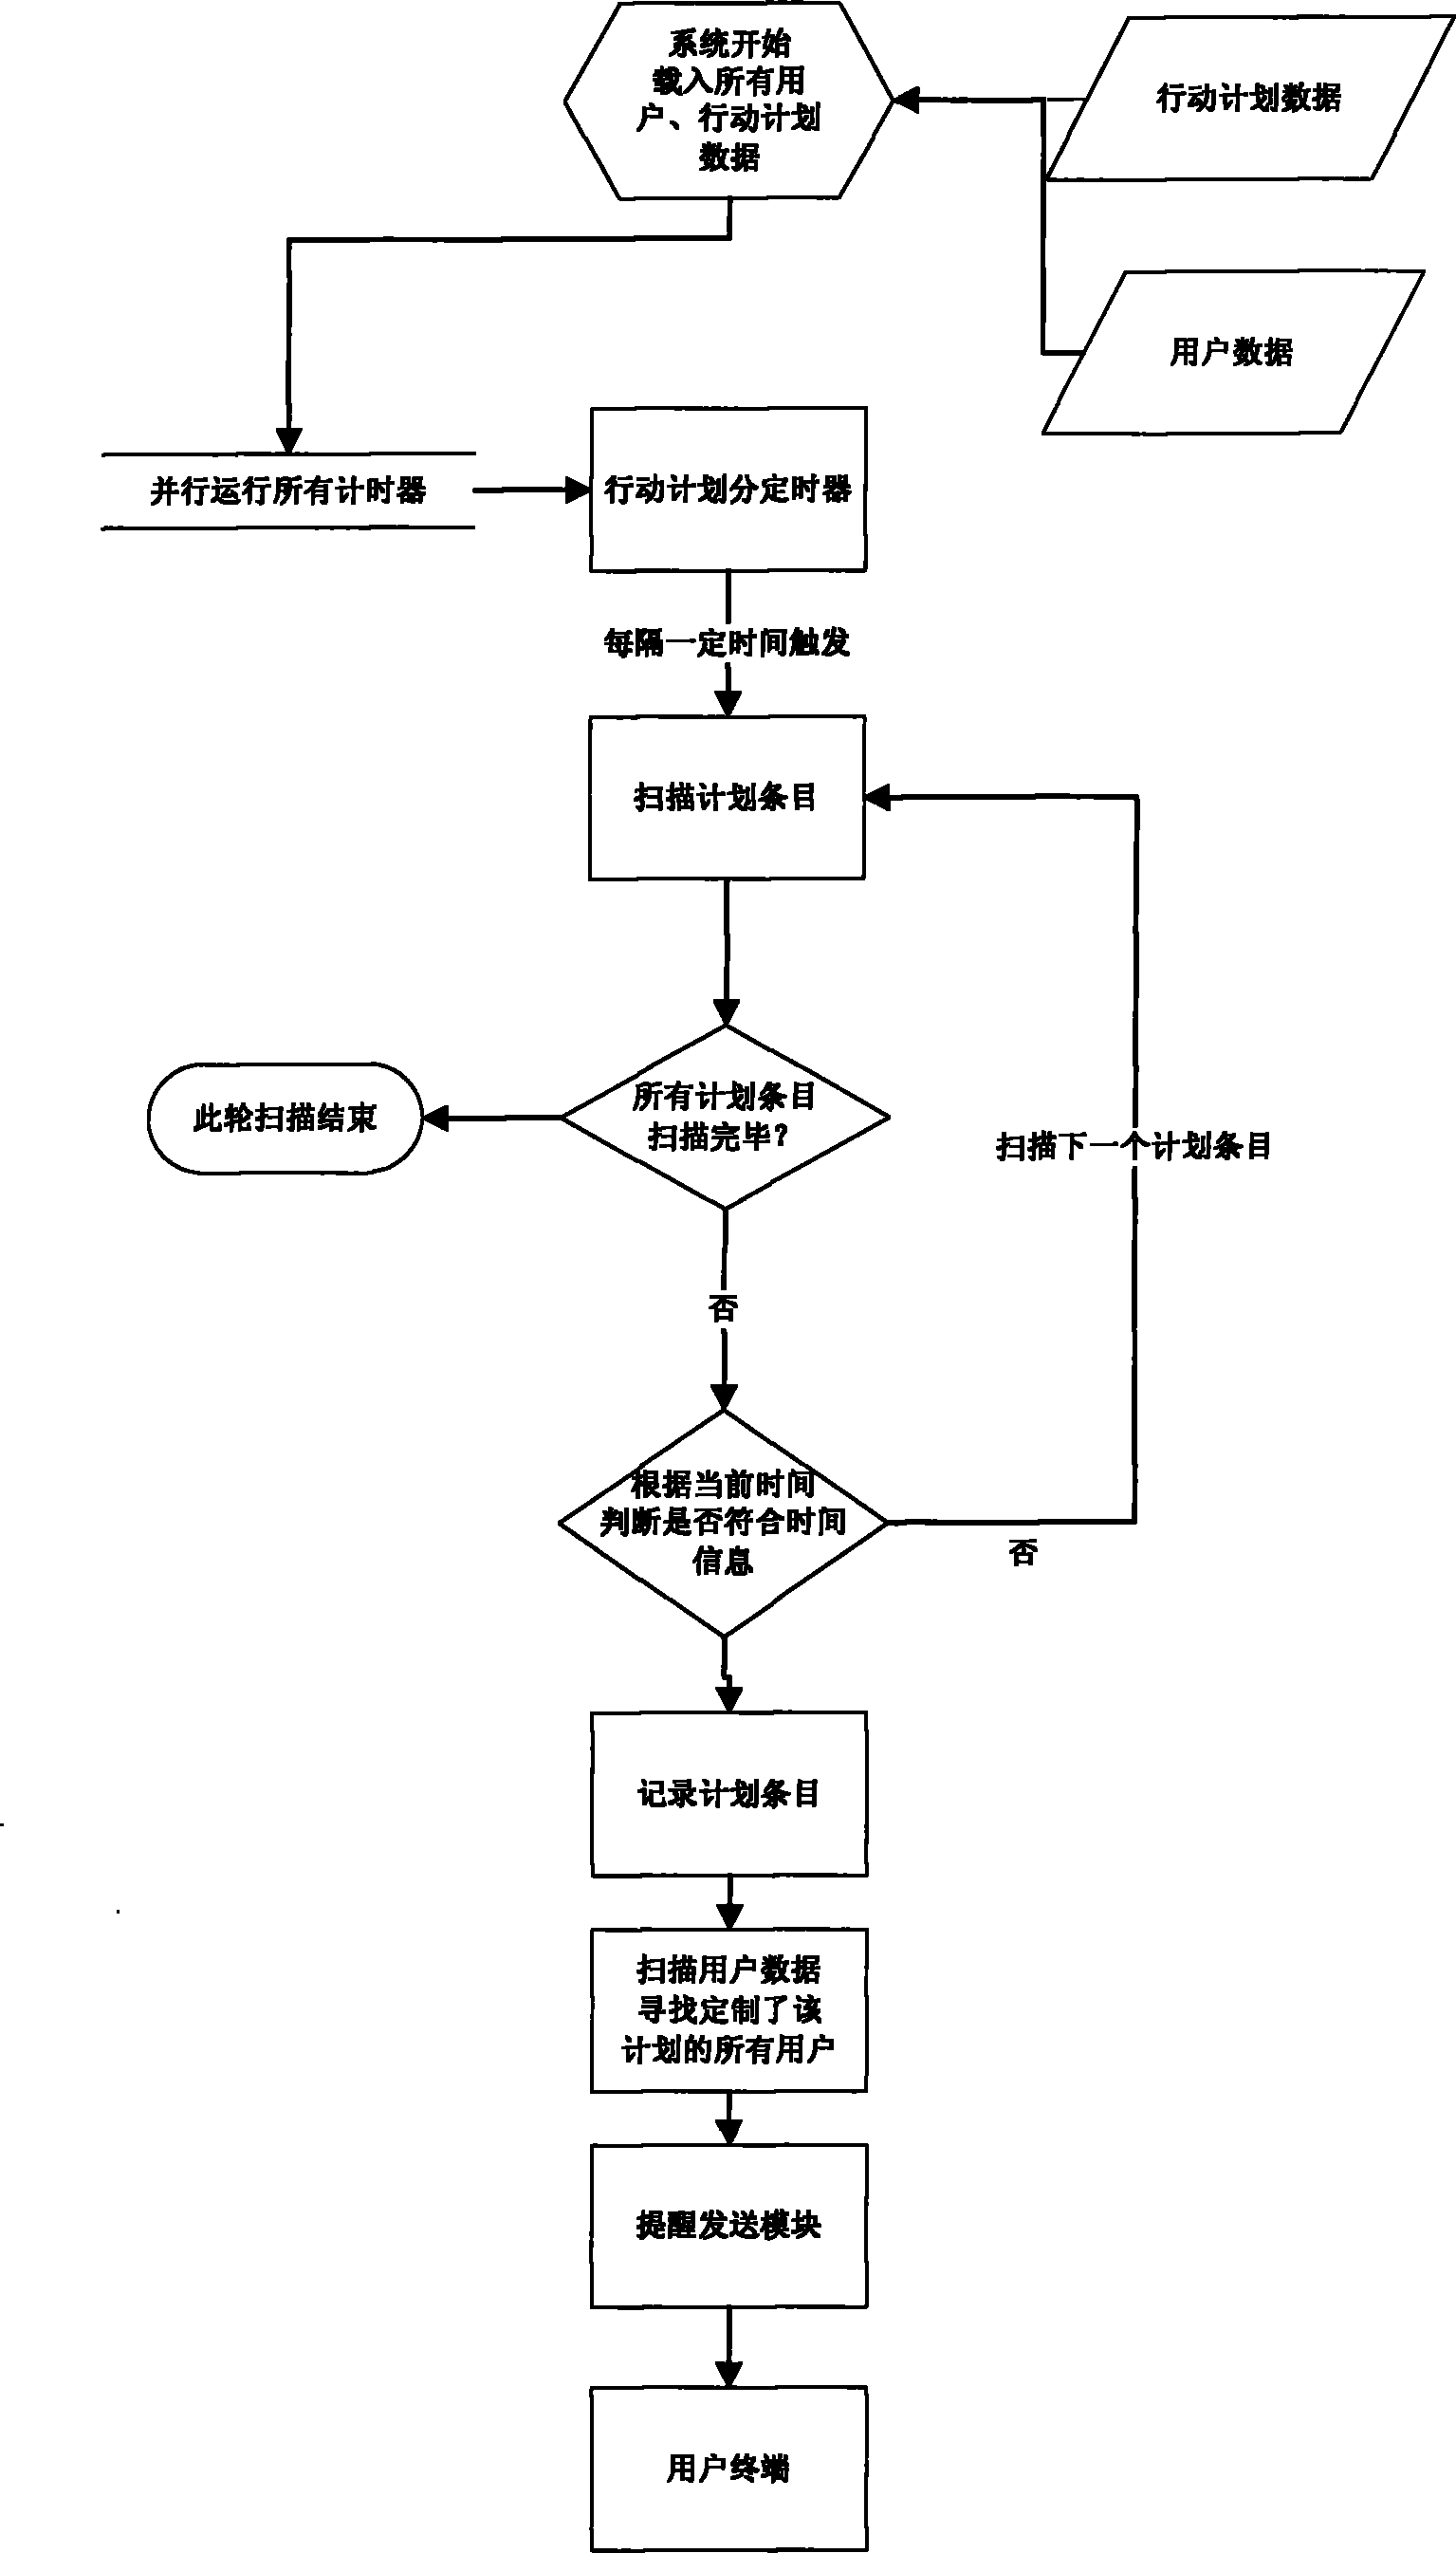 System and method for reminding about health schedules